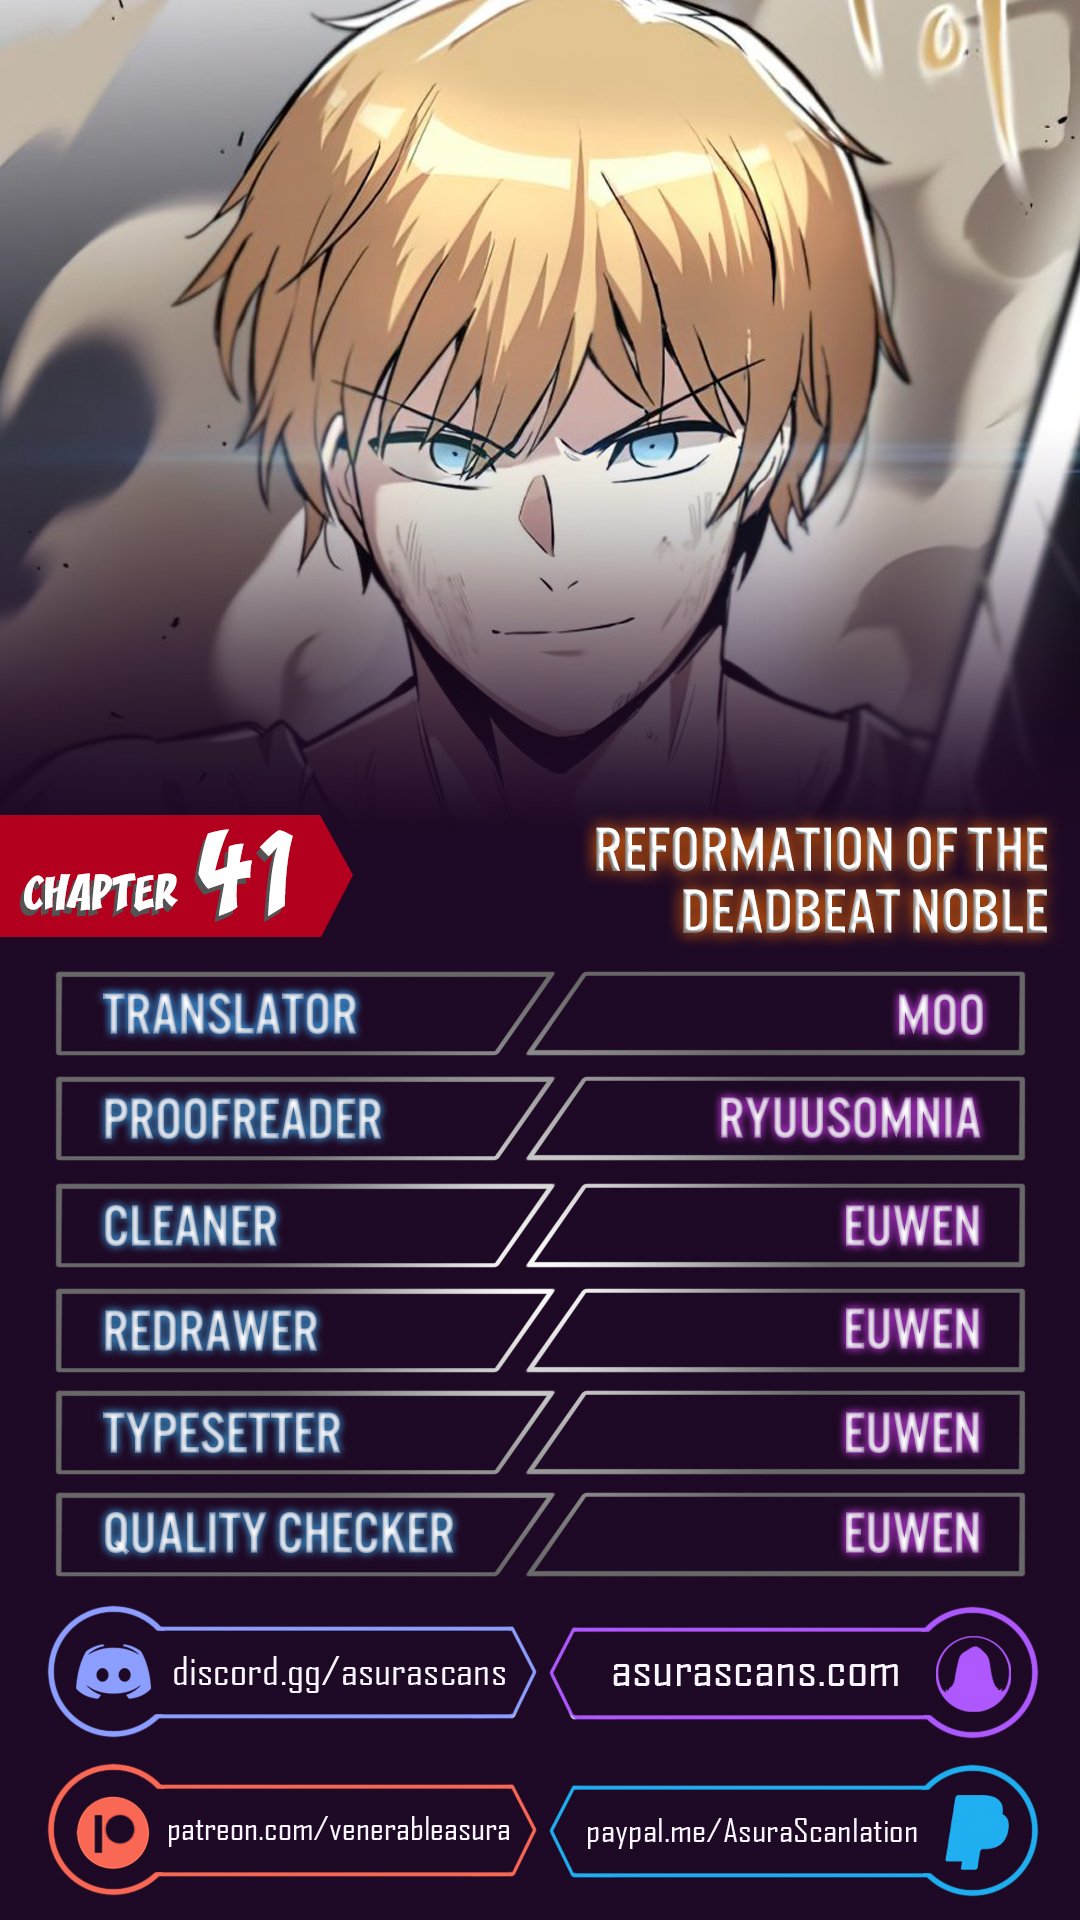 Reformation of the Deadbeat Noble - Chapter 19432 - Season 1 End - Image 1